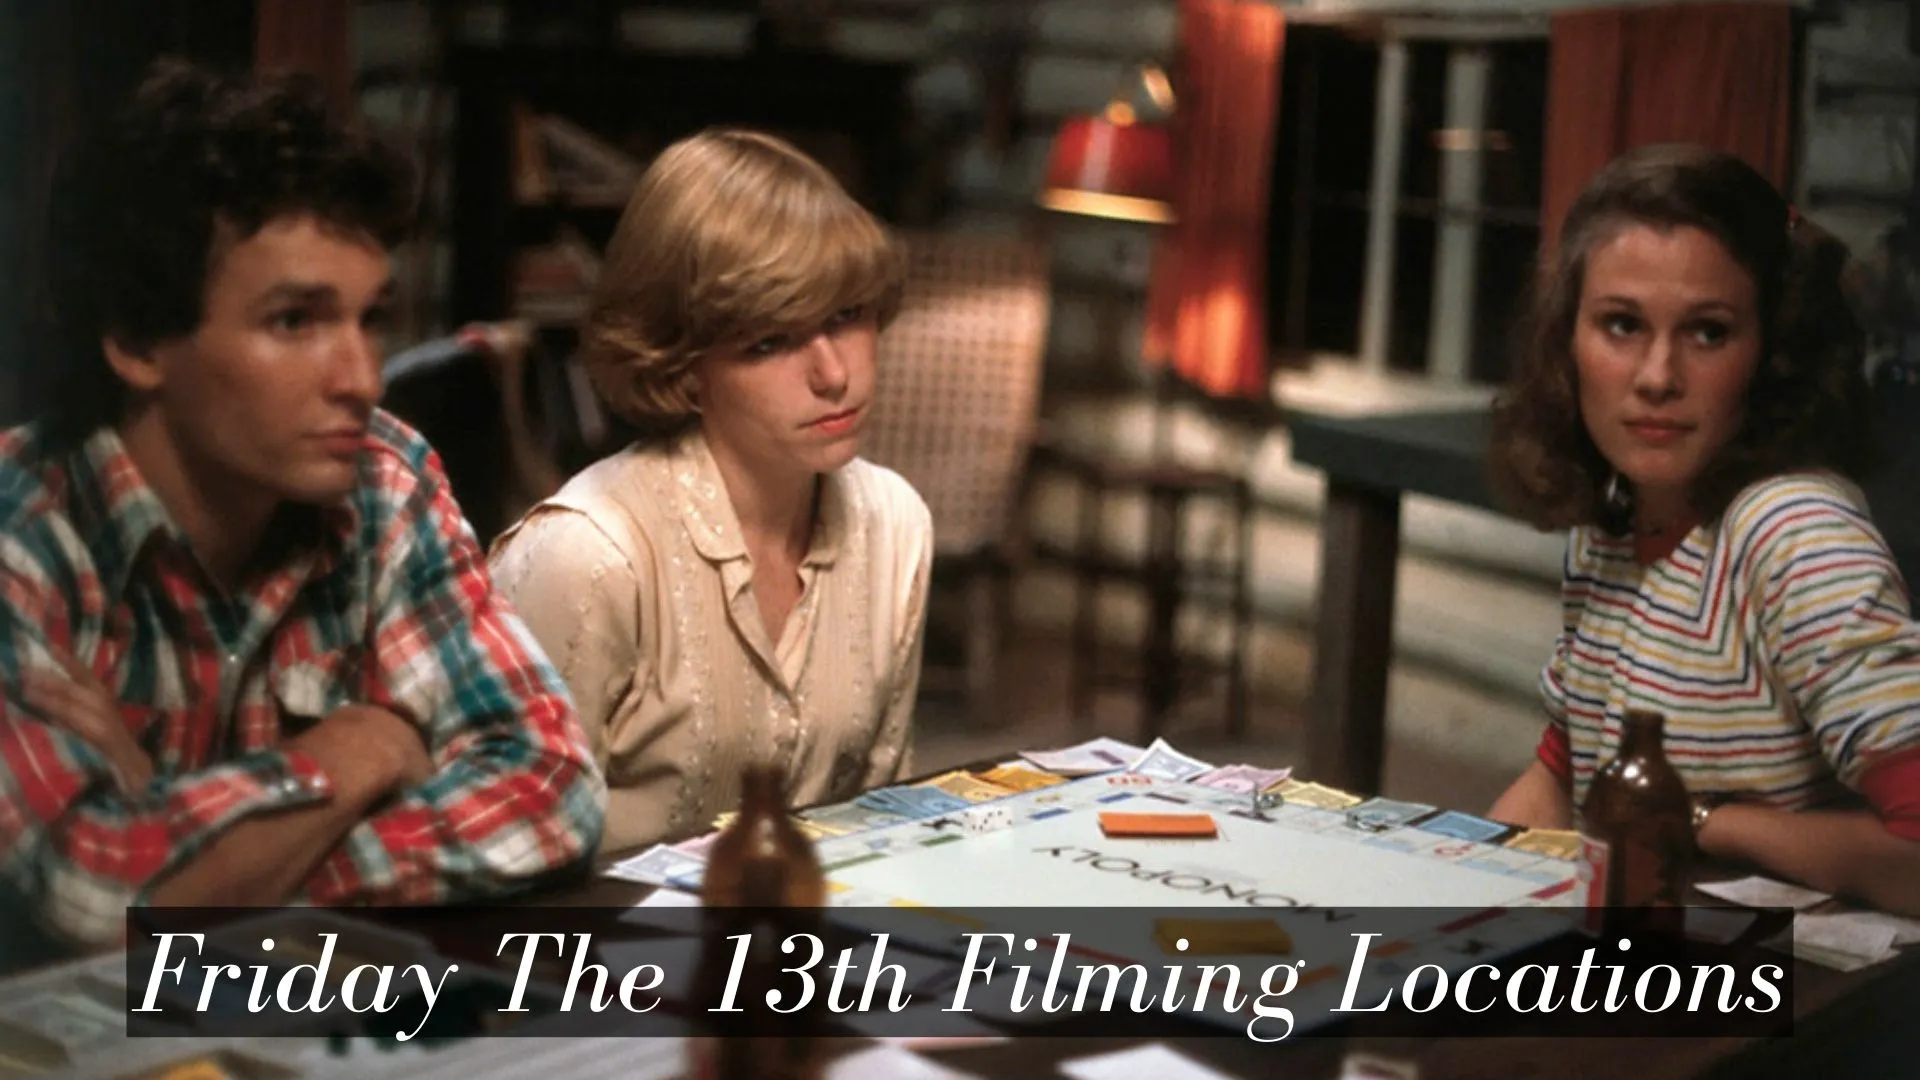 Friday The 13th Filming Locations